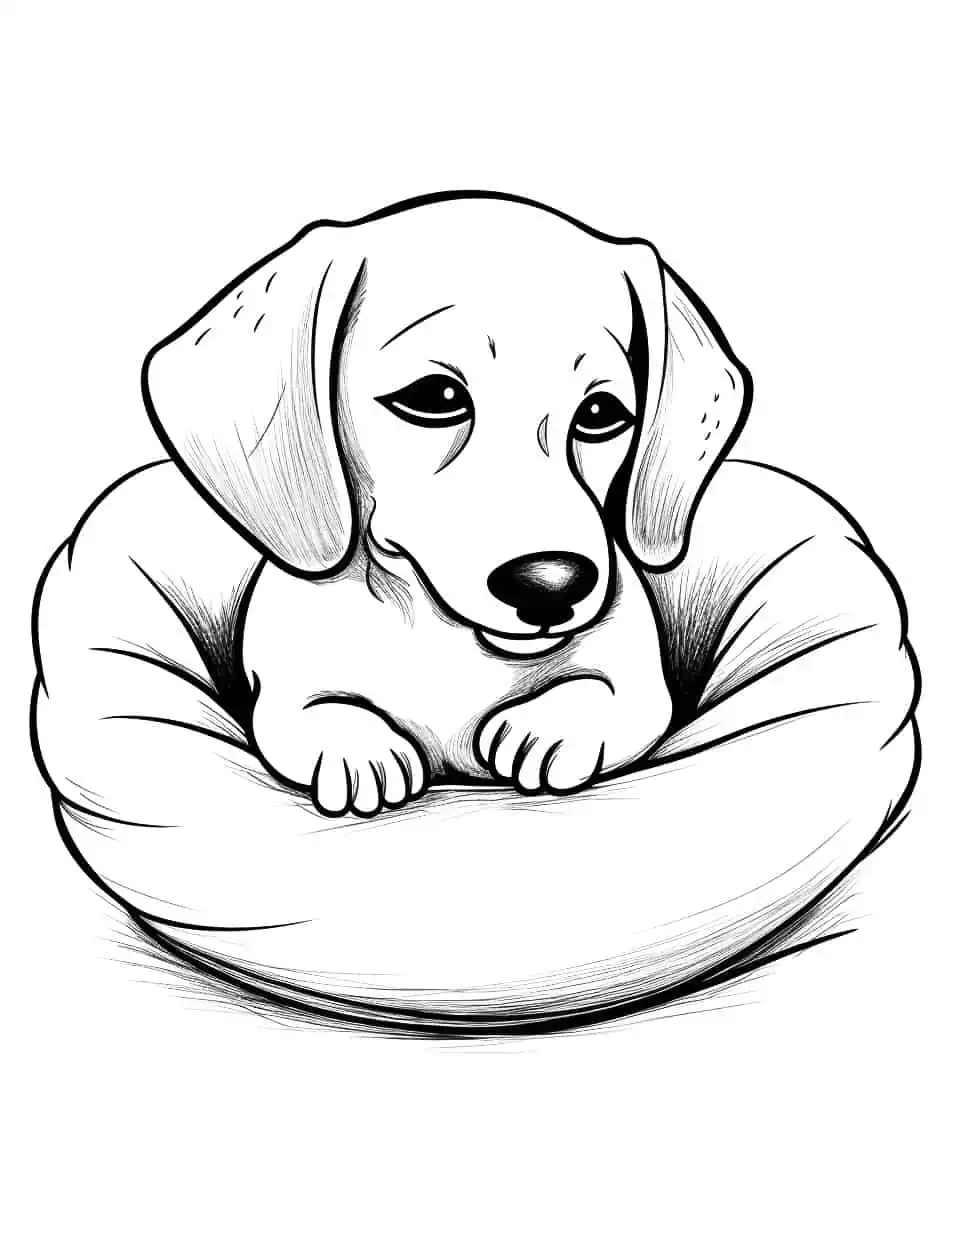 Dachshund's Nap Time Coloring Page - A Dachshund sleeping in a cozy dog bed.